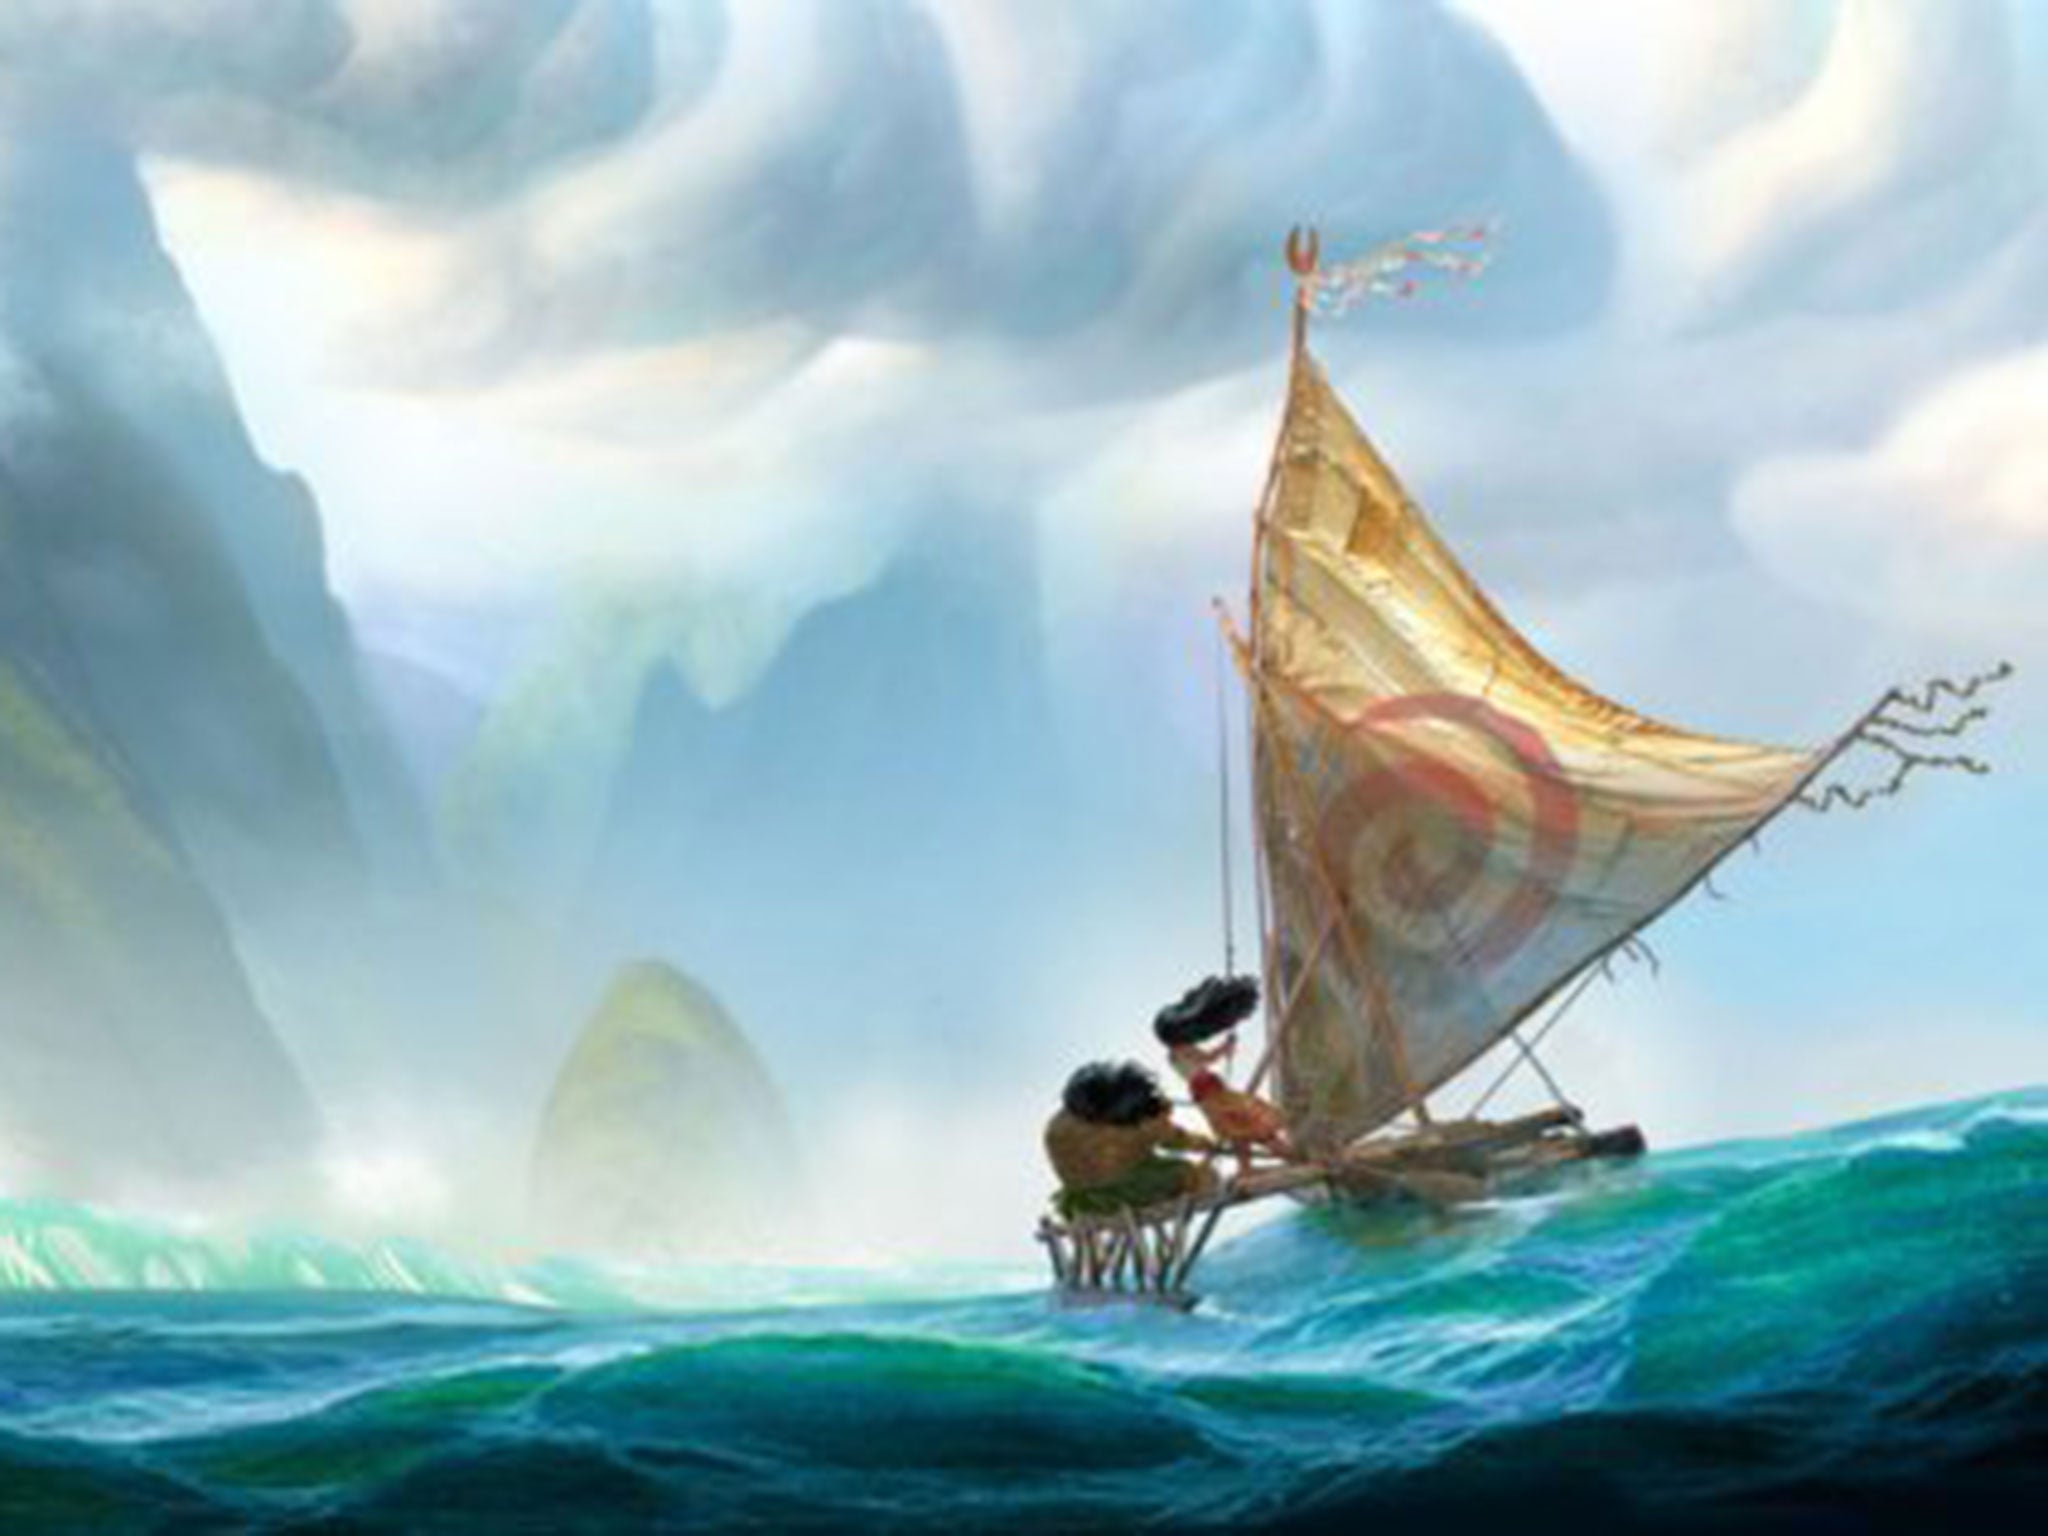 New Disney movie Moana is set for a late 2016 release